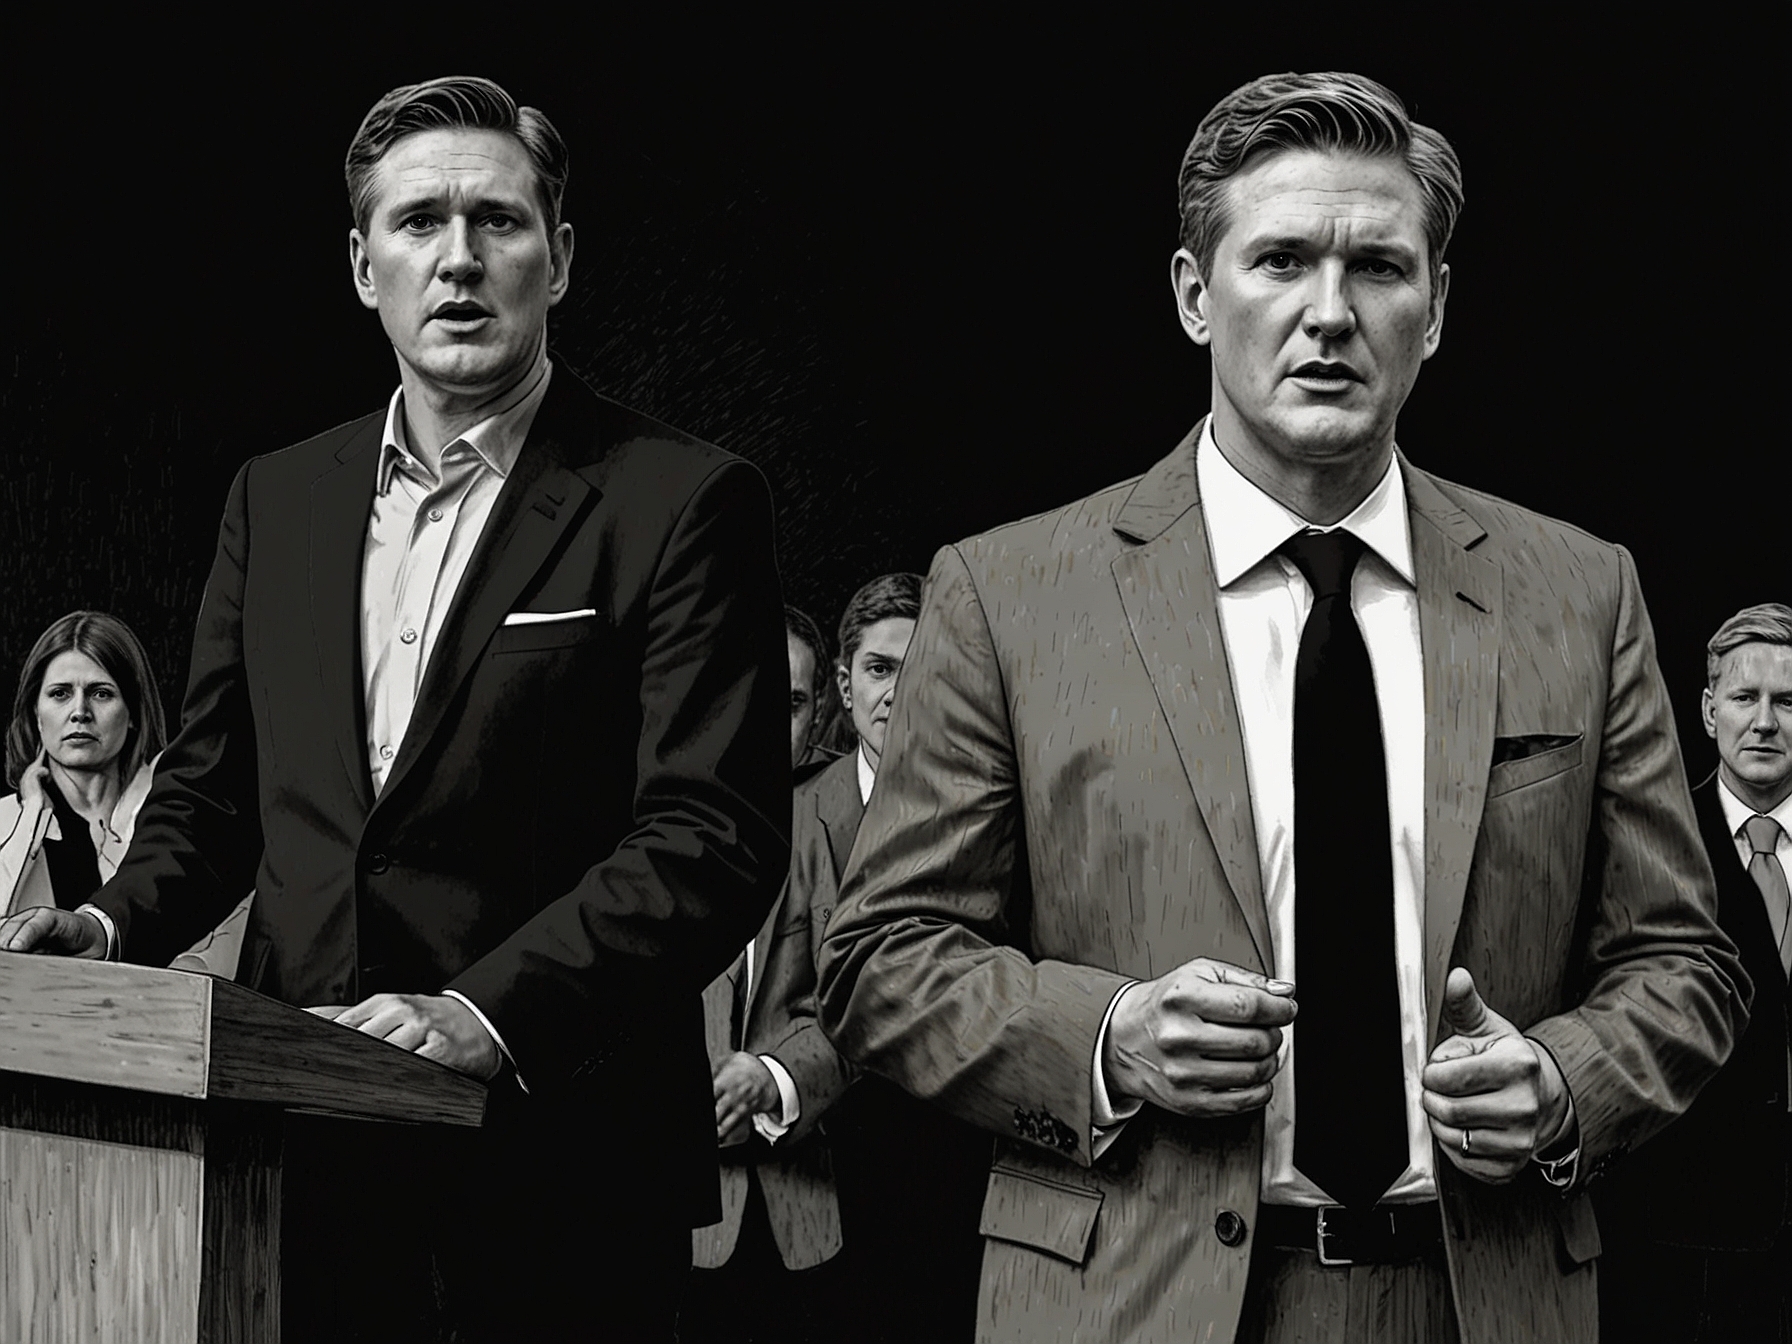 Keir Starmer responds fiercely to Sunak's criticisms in the heated final debate before the U.K. election. He outlines his vision for a fairer society and rebuts allegations of his party's mismanagement. 